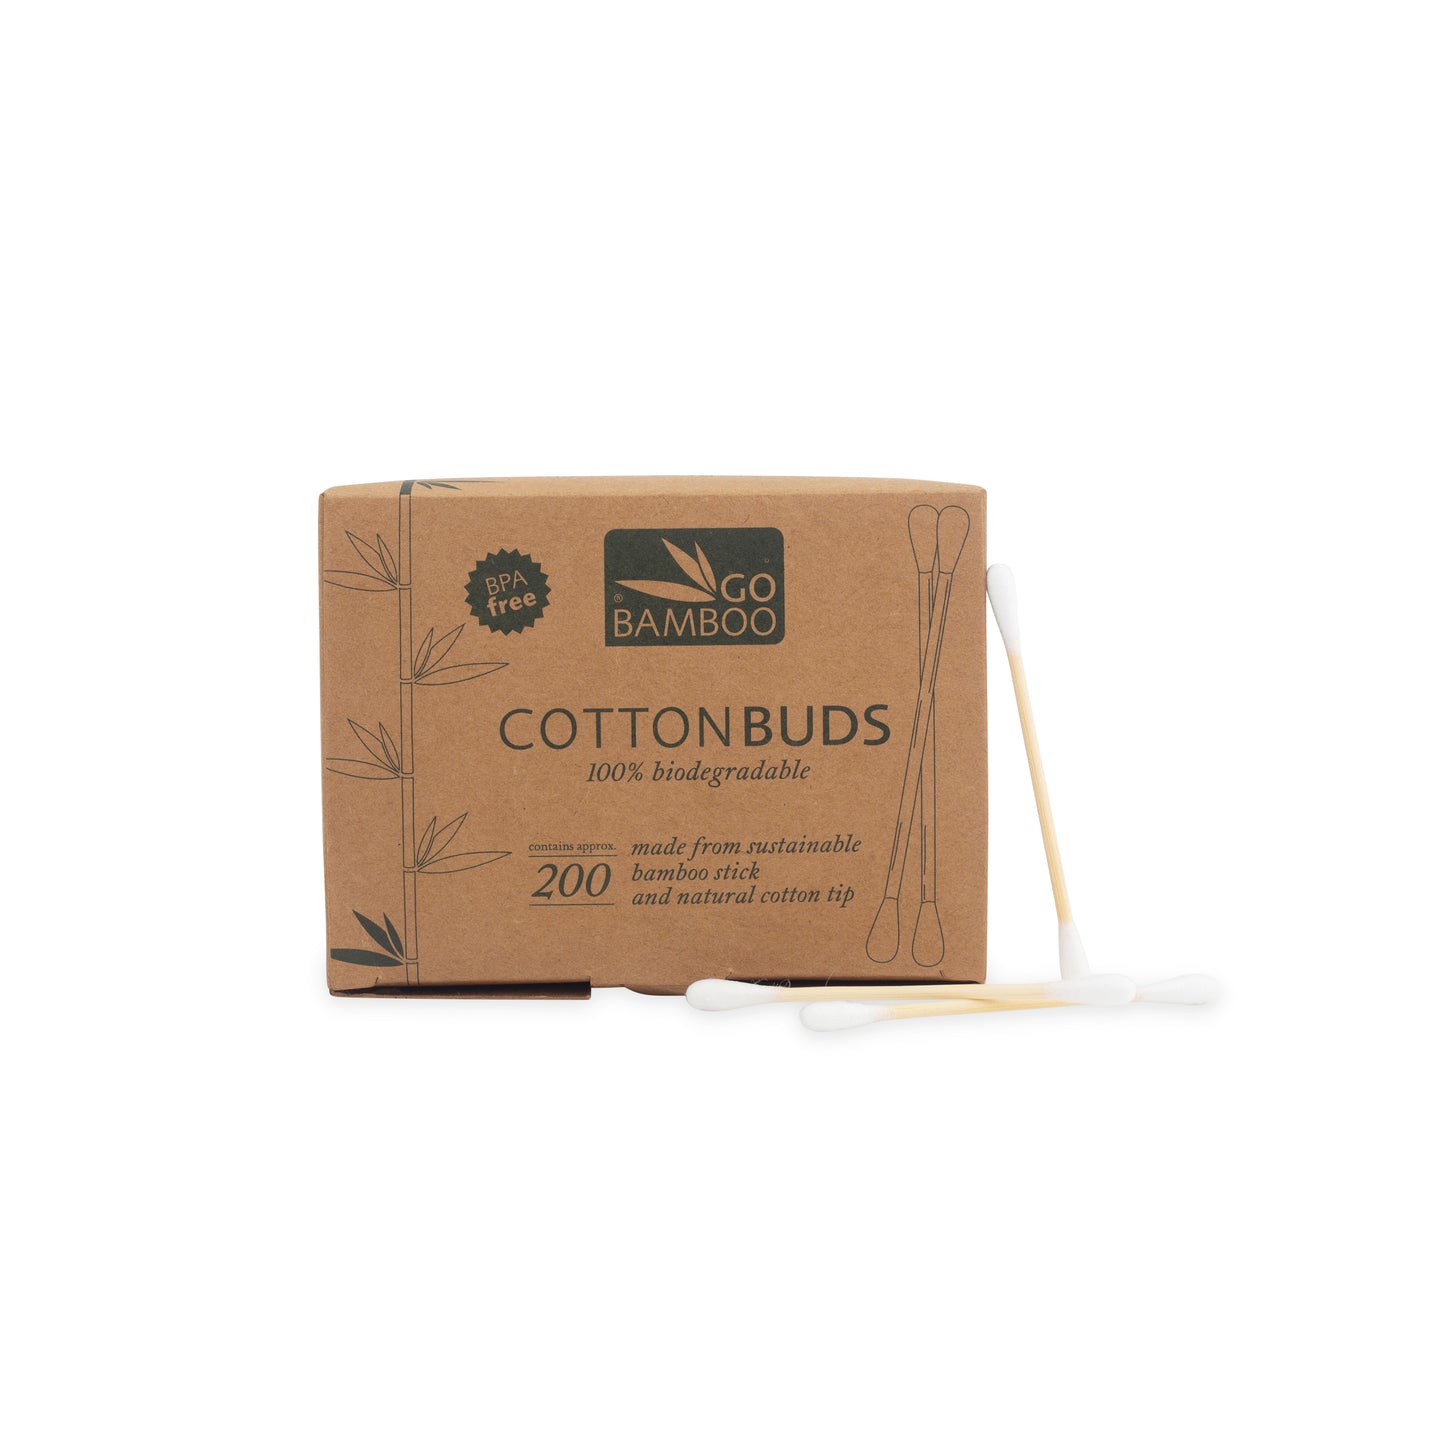 Wooden Cotton Buds - Cotton Buds - Go Bamboo